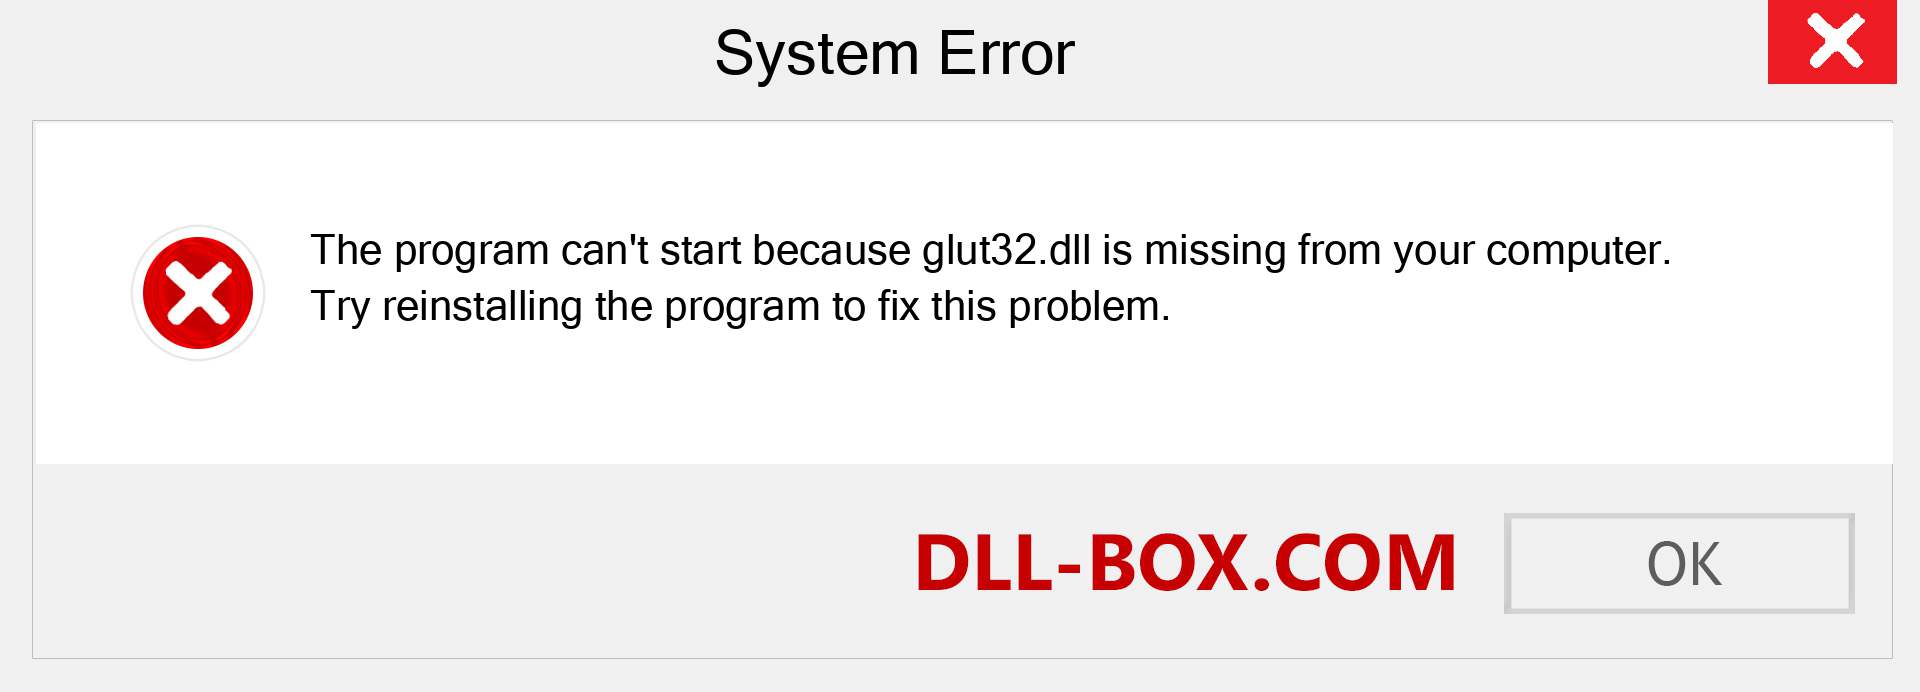  glut32.dll file is missing?. Download for Windows 7, 8, 10 - Fix  glut32 dll Missing Error on Windows, photos, images